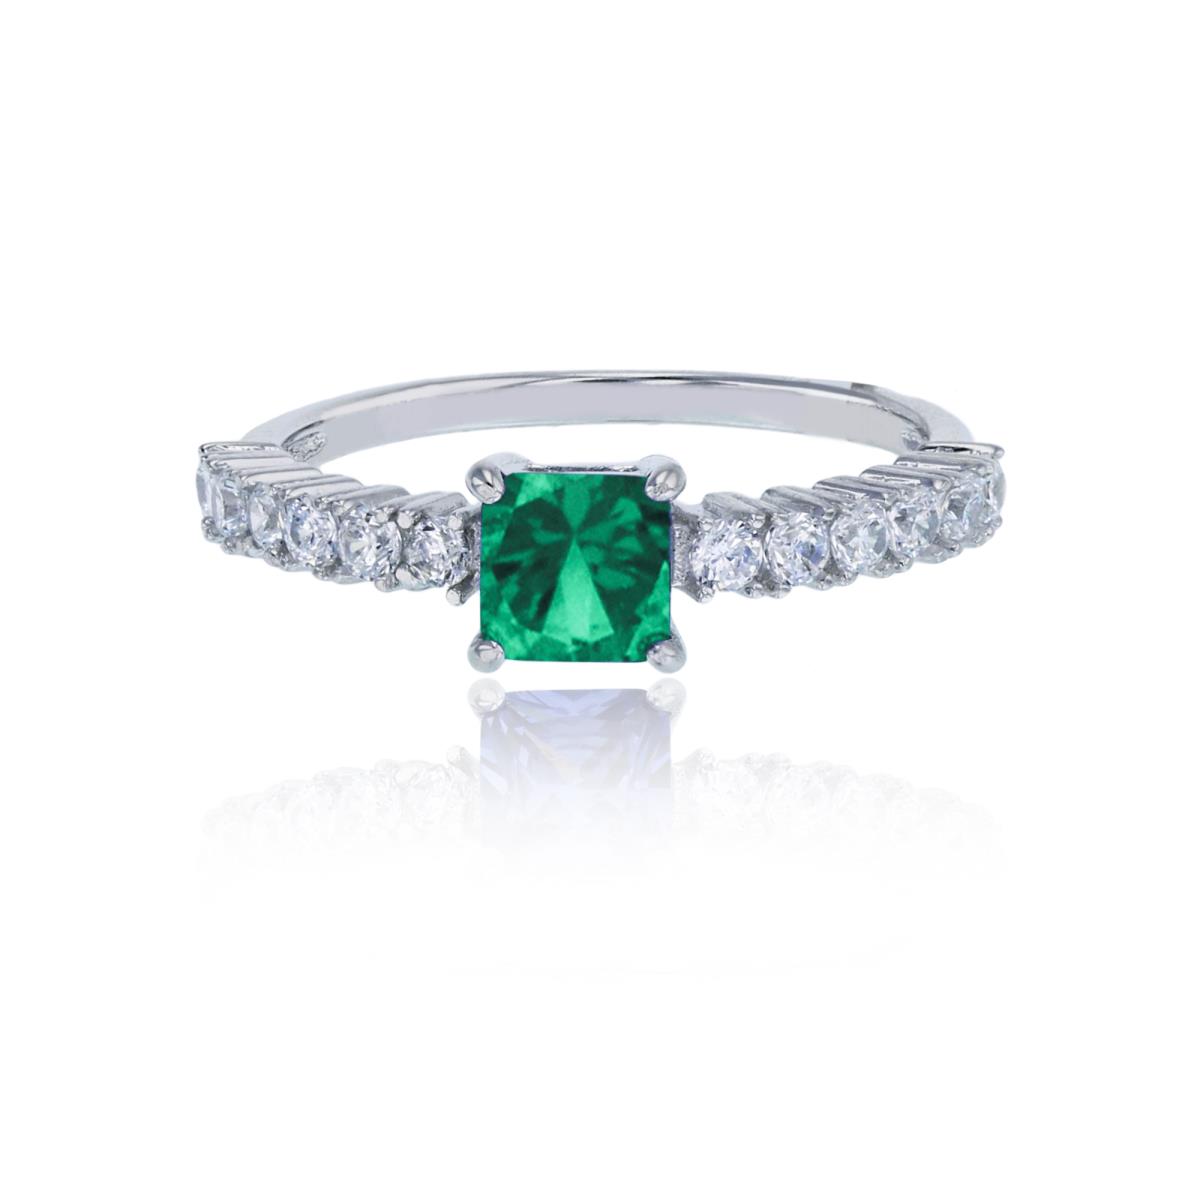 Sterling Silver Rhodium Centered 5mm Green Princess Cut & White Stone Pave Eng Ring